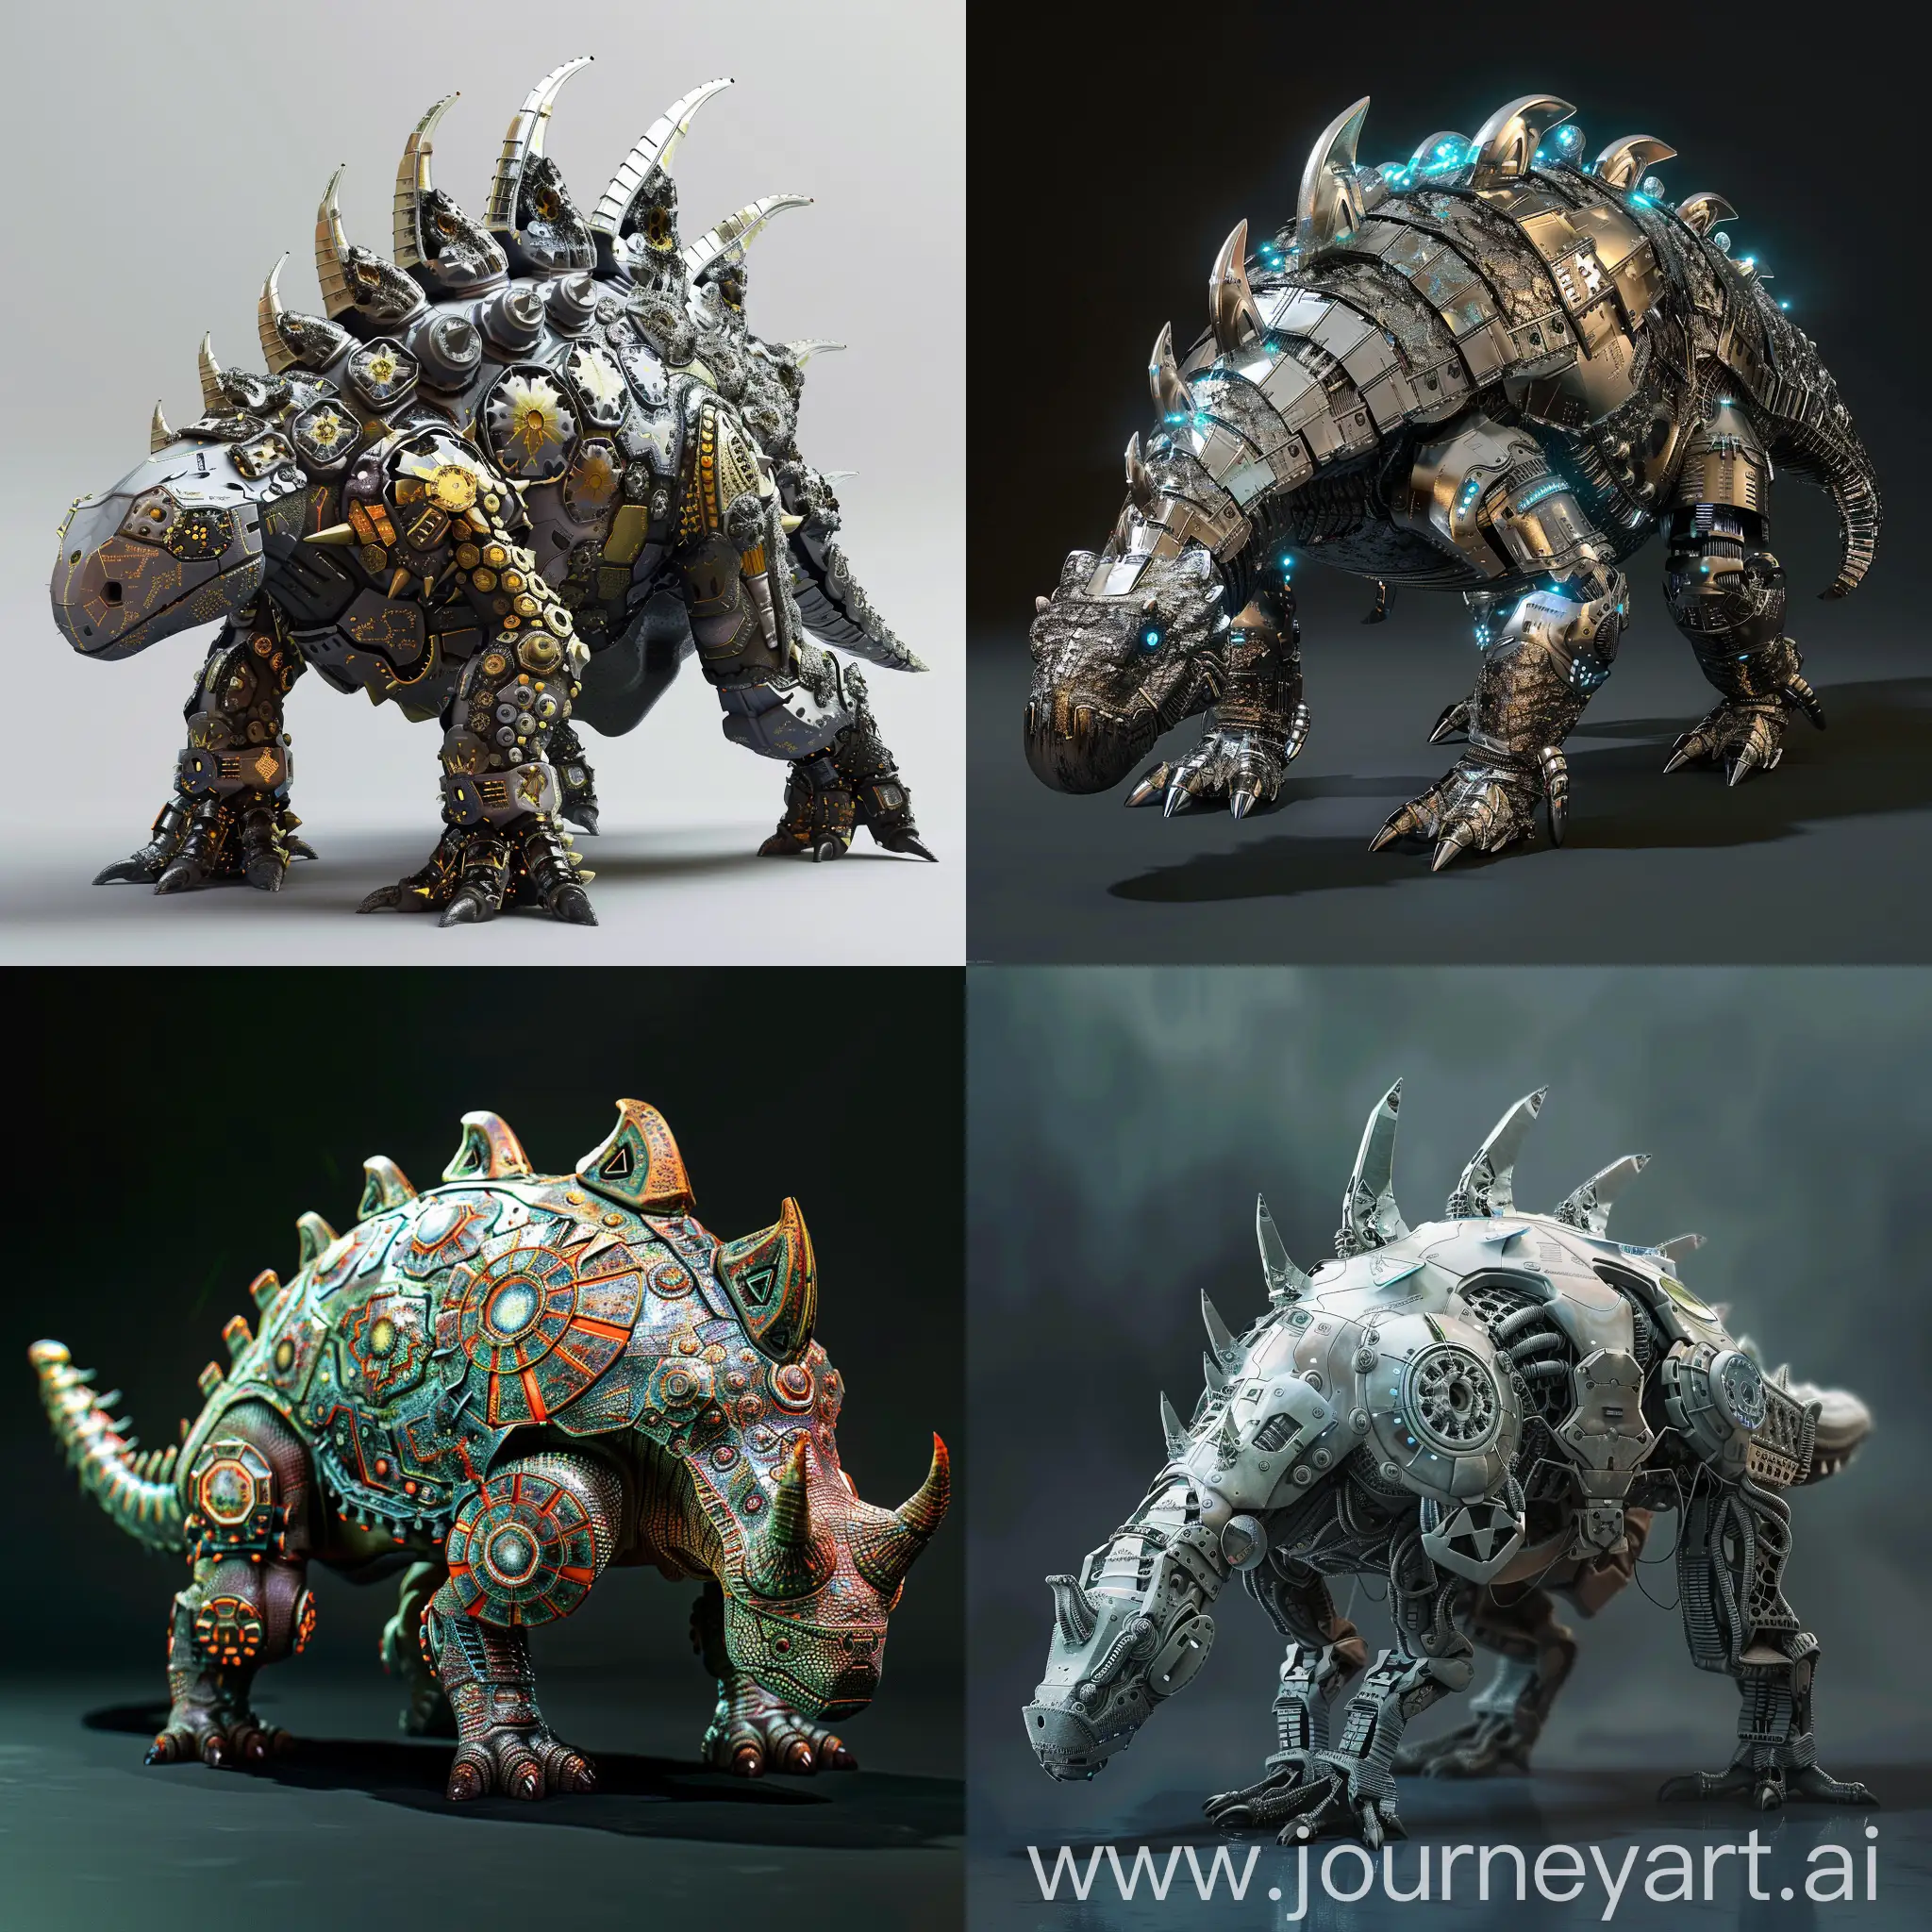 Futuristic ankylosaurus, Plasma Propulsion Tail (inspired by "Turbo Kid" - 2015), Self-Replicating Nano-Armor (inspired by "Primer" - 2004), Fractal Horns for Sonic Disruption (inspired by "Sphere" - 1998), Symbiotic Energy Core (inspired by "Avatar" - 2009), Precognitive Eye Implants (inspired by "Minority Report" - 2002), Adaptive Camouflage (inspired by "Predators" - 2010), Internal Shockwave Generators (inspired by "Pacific Rim" - 2013), Microbial Cloud Dispersal System (inspired by "The Blob" - 1988), Voluntary Limb Detachment (inspired by "Terminator 2: Judgment Day" - 1991), Internal Forge (inspired by "Attack on Titan" - 2013), Kinetic Drumming Tail Club (inspired by "Scott Pilgrim vs. the World" - 2010), Fractal Plate Armor (inspired by "Ex Machina" - 2014), Morphing Spikes (inspired by "The Thing" - 1982), Holographic Decoy Projectors (inspired by "Inception" - 2010), Bioluminescent Threat Displays (inspired by "Annihilation" - 2018), Adaptive Camouflage Skin (inspired by "Rango" - 2011), Sonic Resonator Plates (inspired by "A Quiet Place" - 2018), Magnetic Cargo Hold Tail (inspired by "X-Men" - various X-Men movies), Ecosystem Cloud Generators (inspired by "Ponyo" - 2008), Parasite Docking Stations (inspired by "Men in Black" - 1997), unreal engine 5 rendering, 4K-UHD, 8K-UHD, super-hi vision, soft shadows, soft reflections, soft lighting, soft light, soft light, soft details, hard shadows, hard reflections, hard lighting, hard light, hard details --stylize 1000